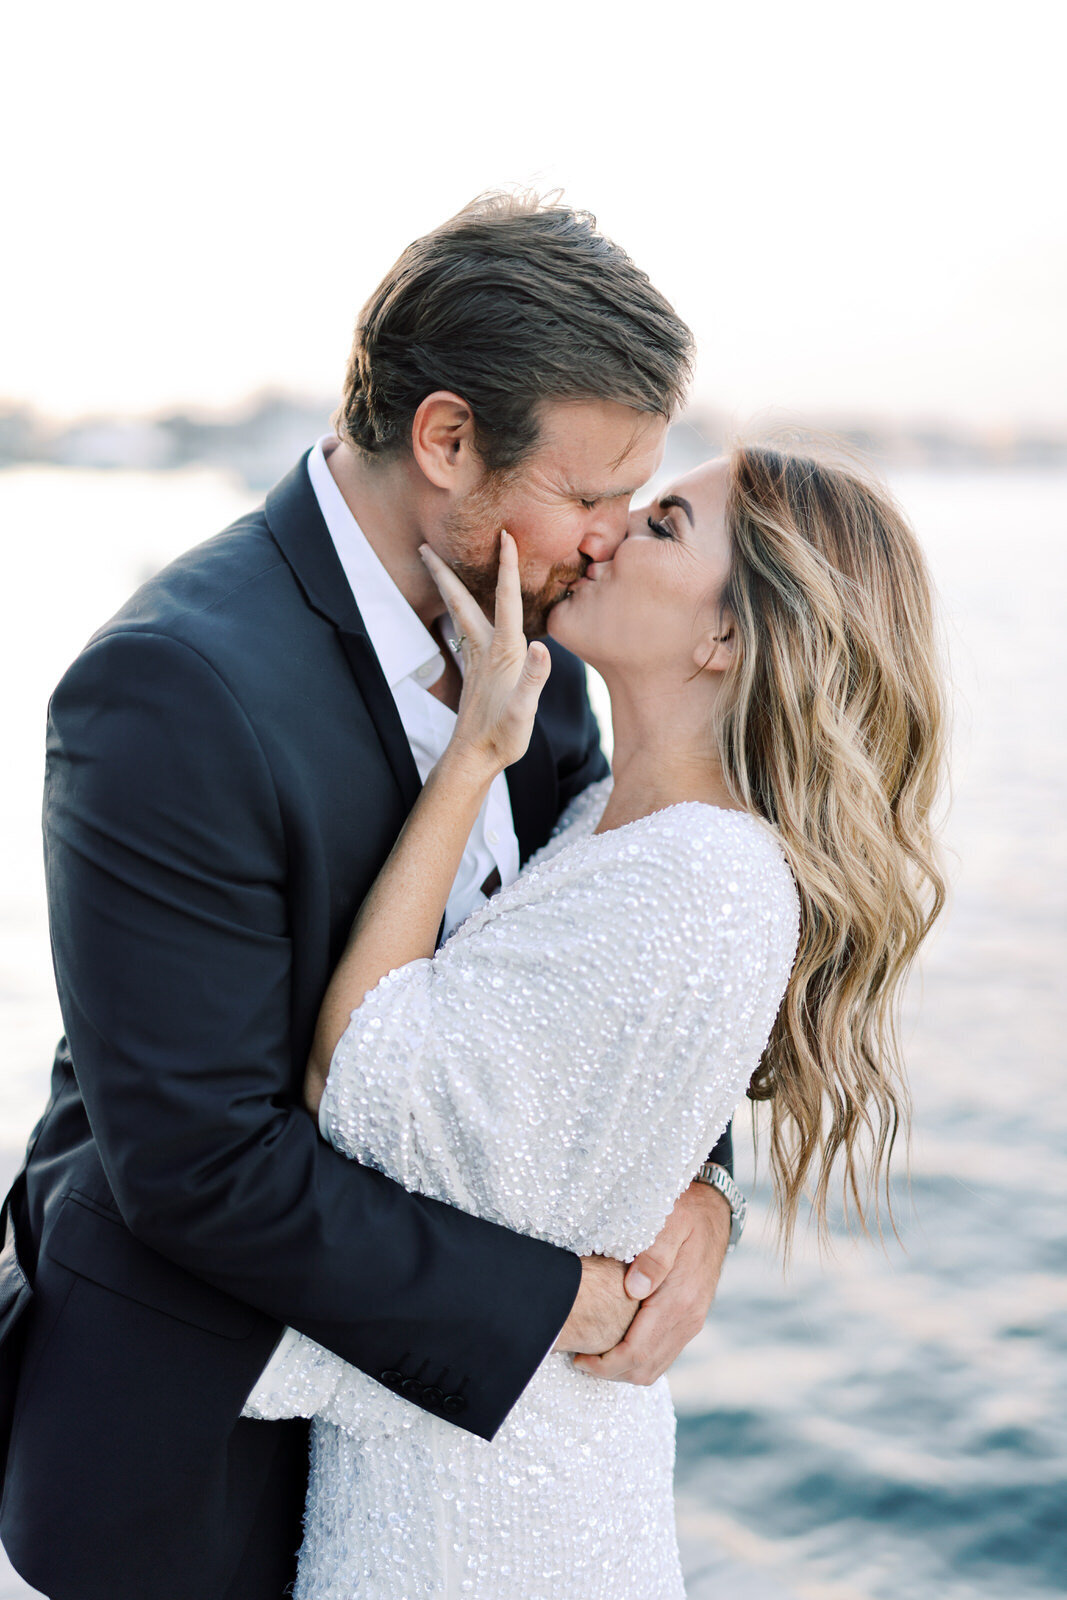 Waterside Engagement Session in Boston 2